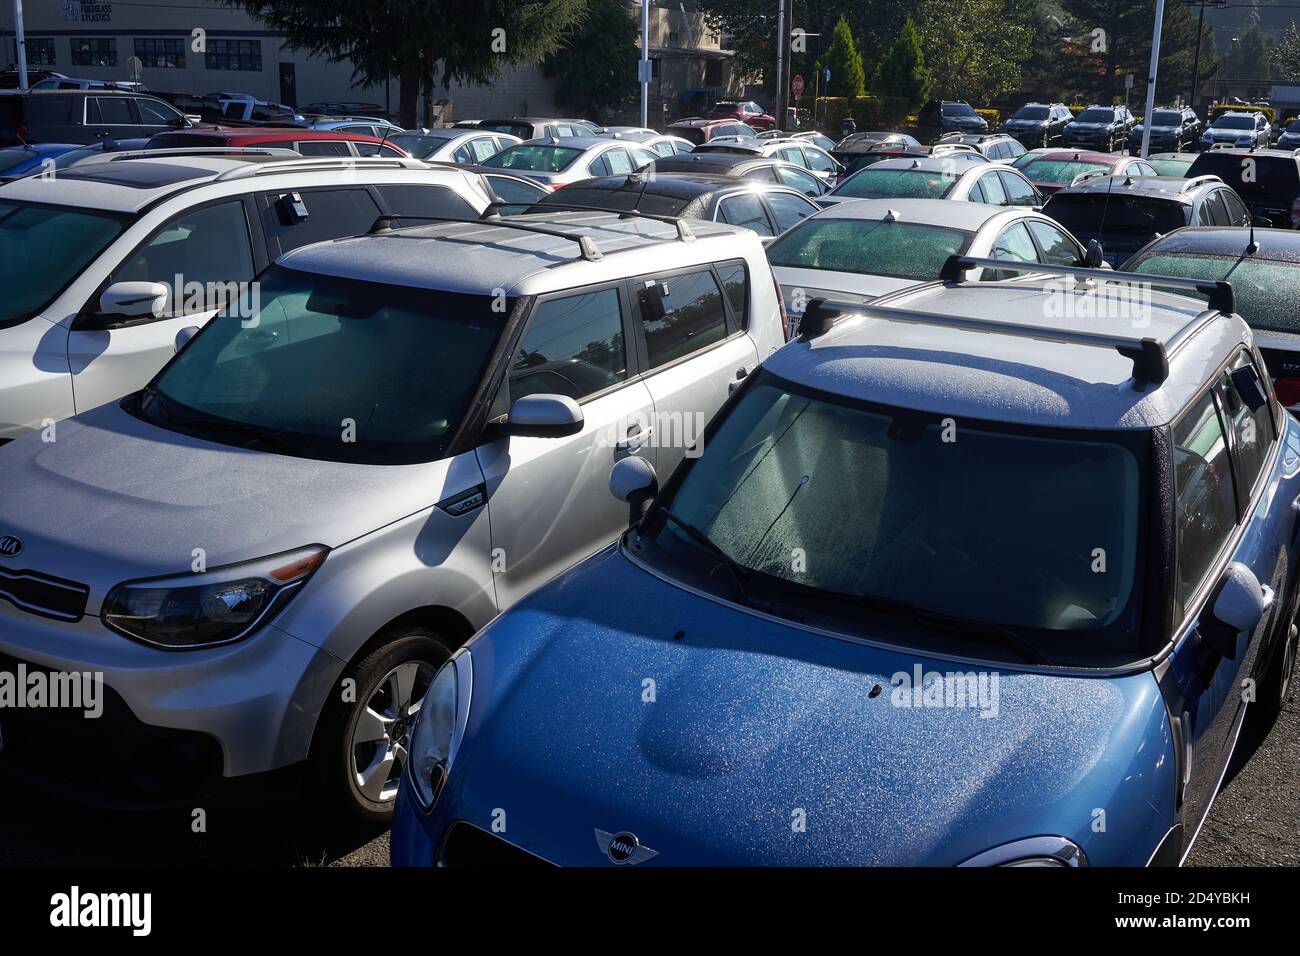 Used cars for sale in a car dealership in Oregon City. Stock Photo